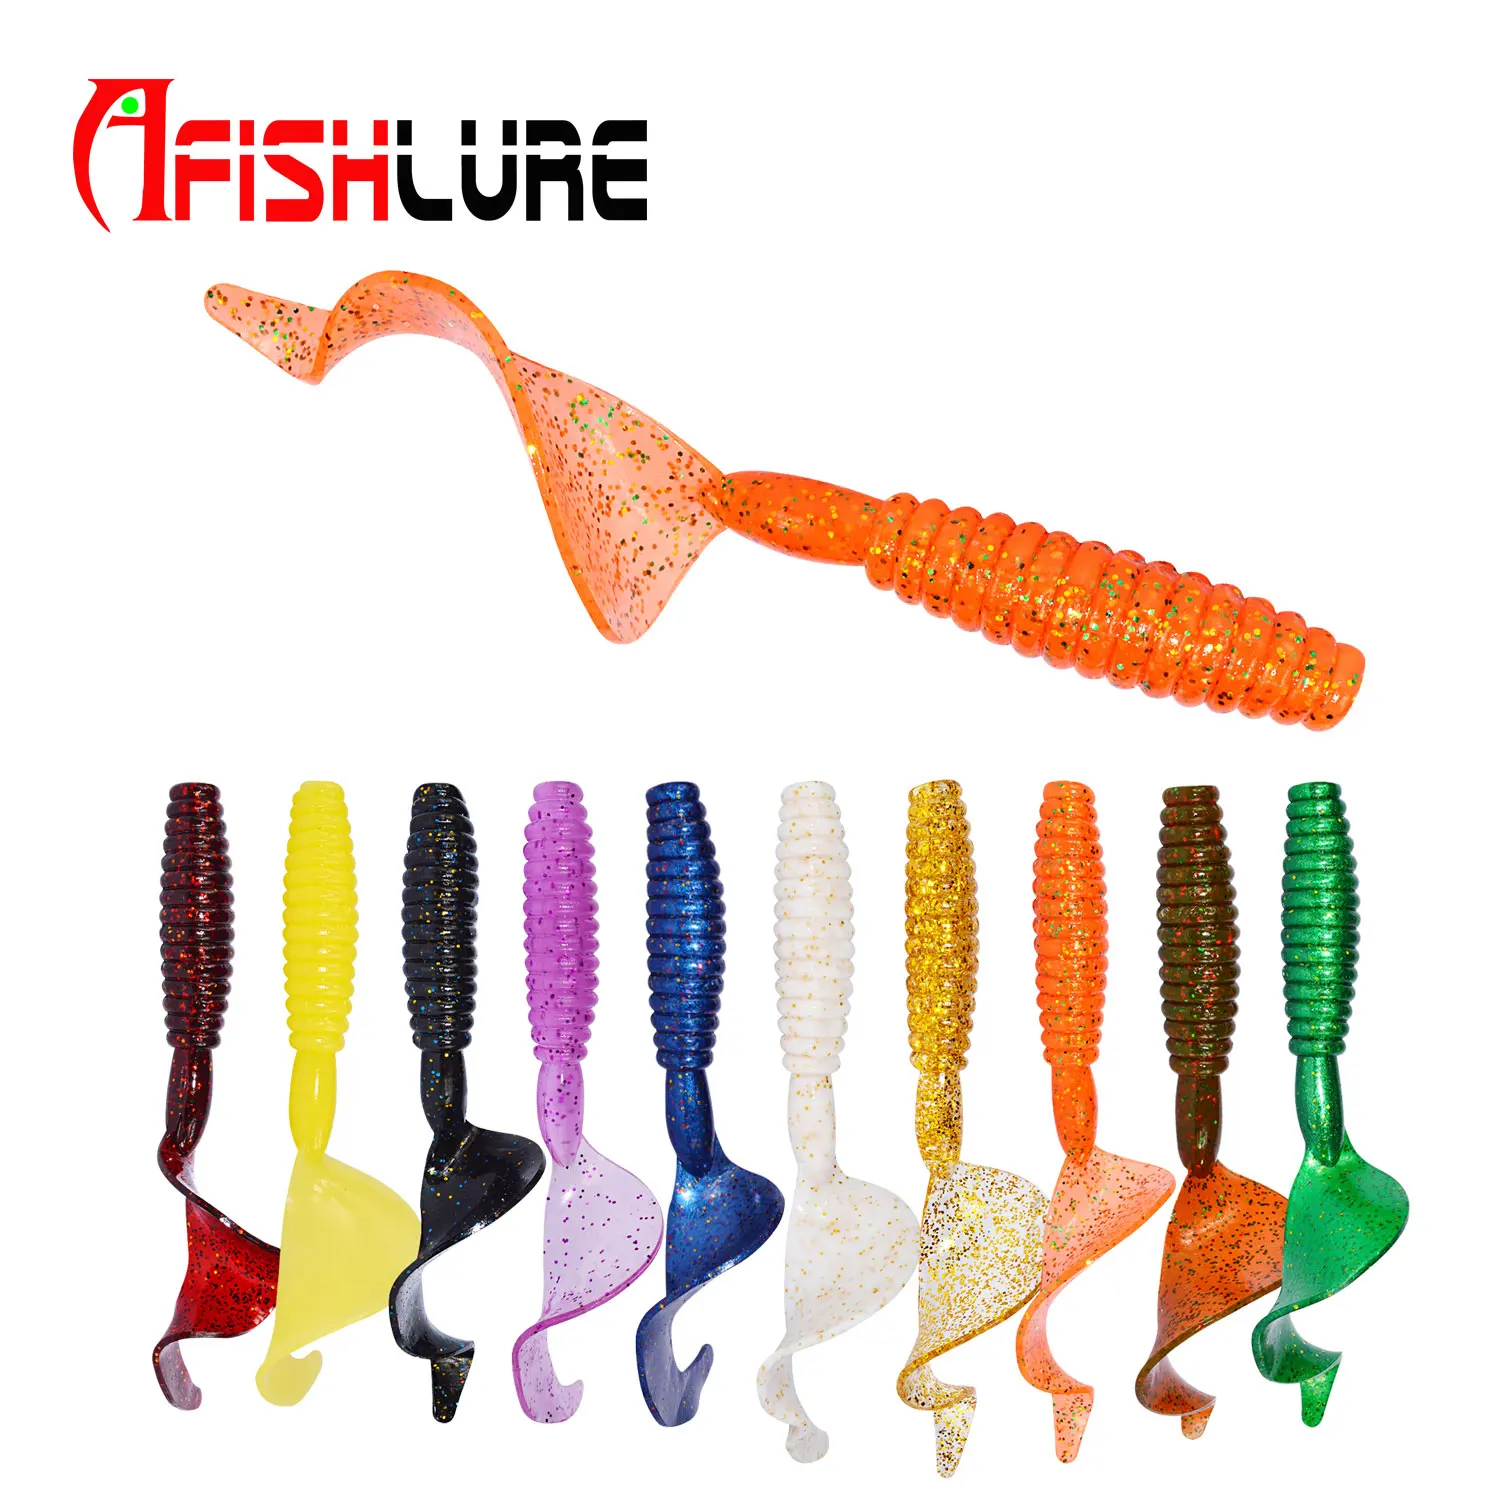 

Hot Sale Pesca Wholesale Curled coiled Tails Soft Lure 105mm 12g AR05 3pcs/bag Big Tail Soft Fishing Lure